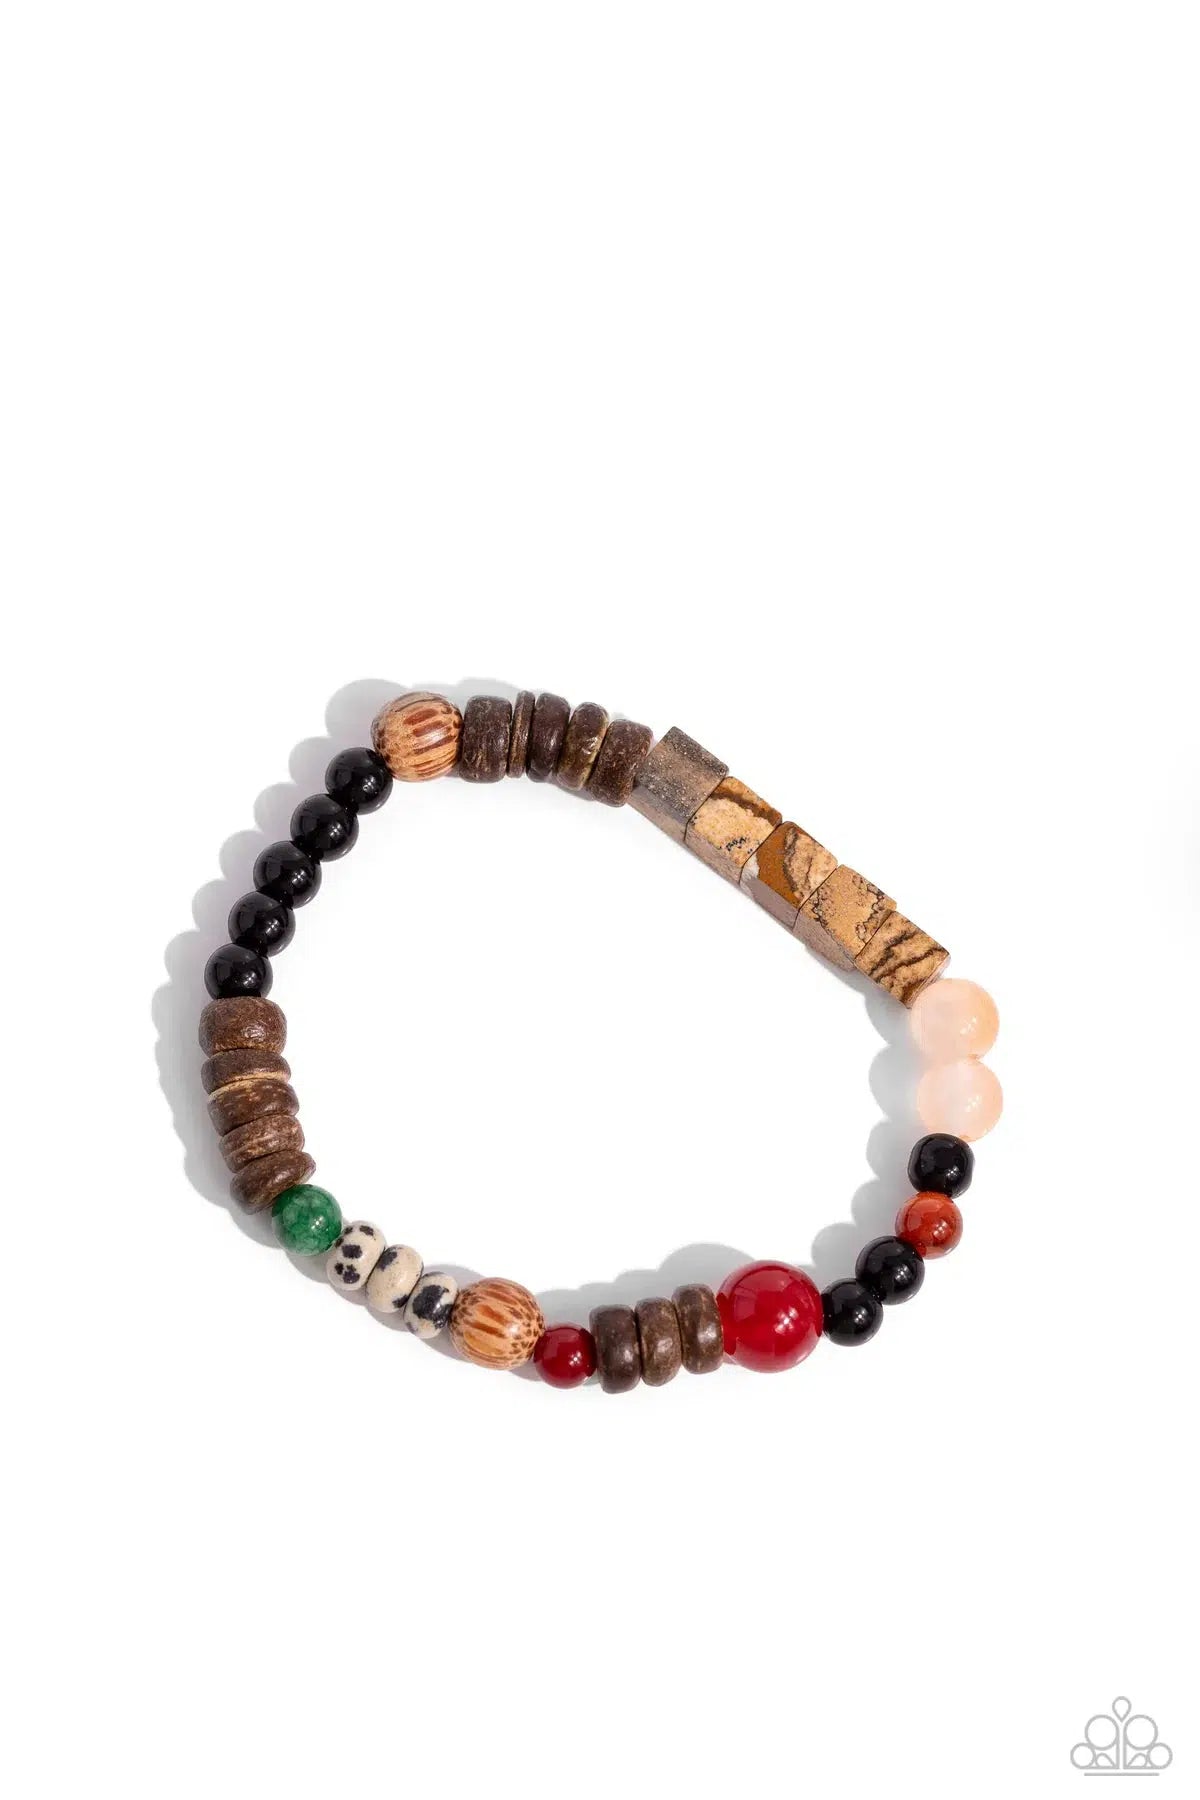 I &quot;WOOD&quot; Be So Lucky Orange Bracelet - Paparazzi Accessories- lightbox - CarasShop.com - $5 Jewelry by Cara Jewels